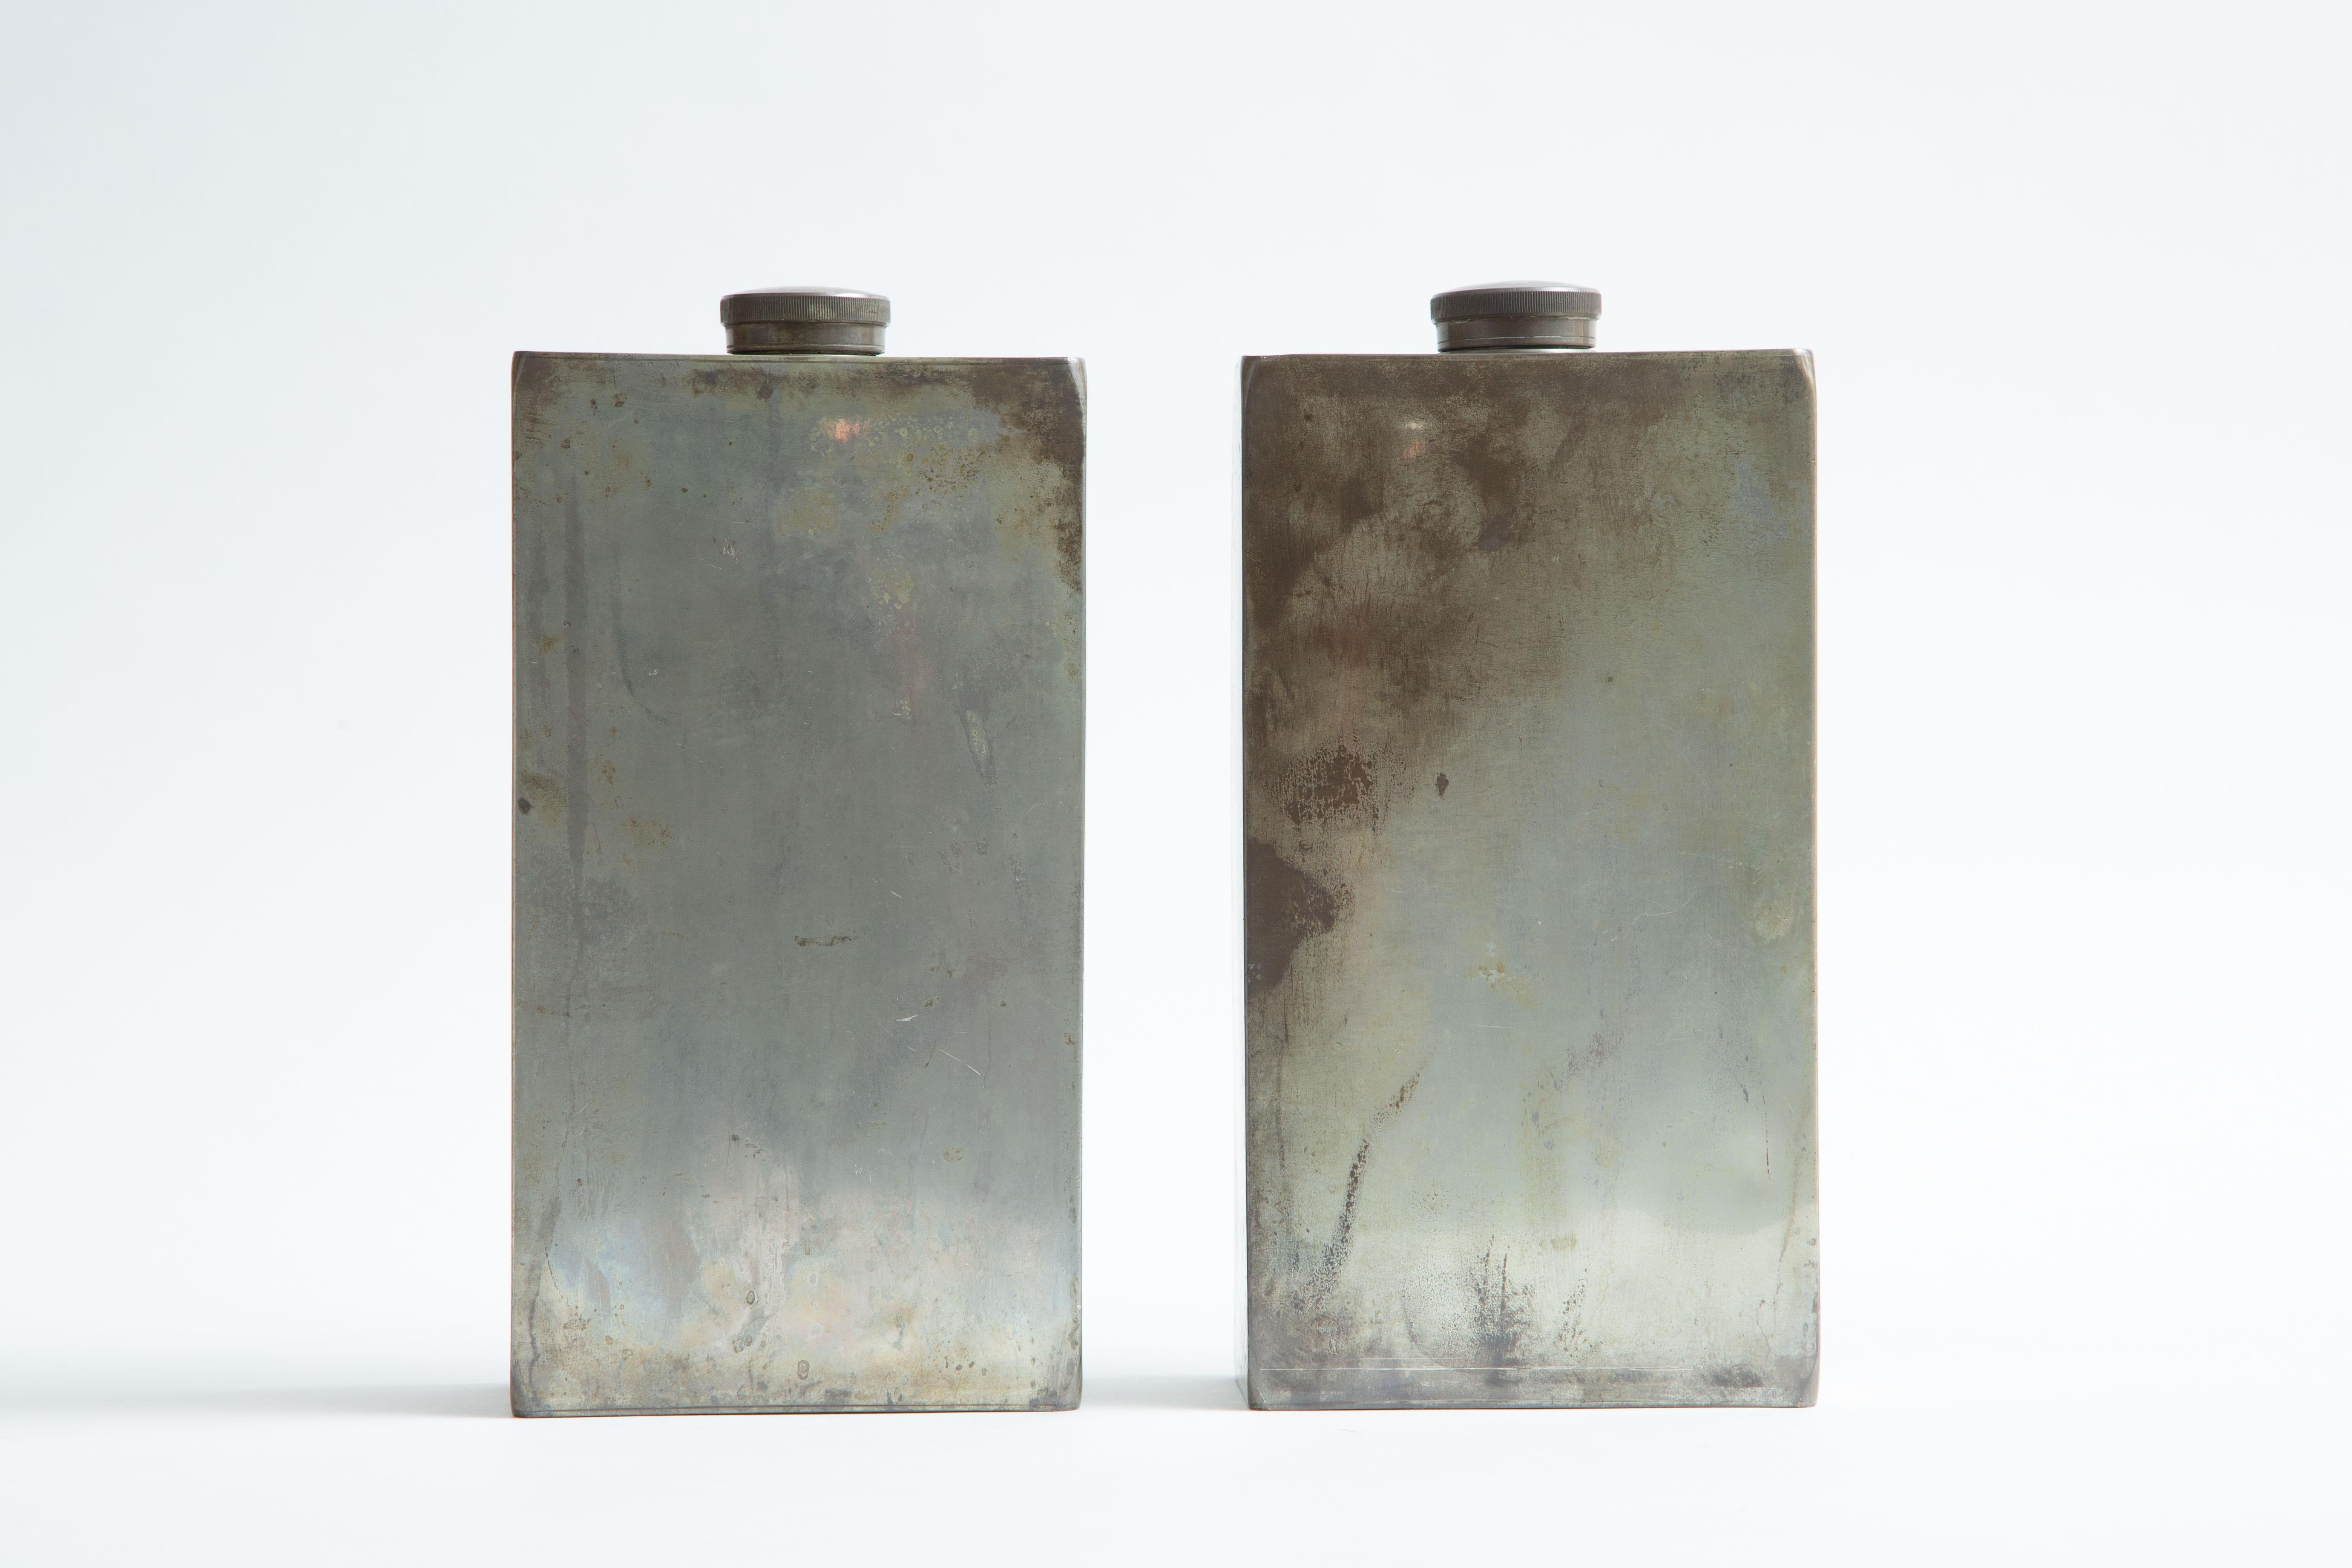 A pair of signed, hallmarked drinking flasks.